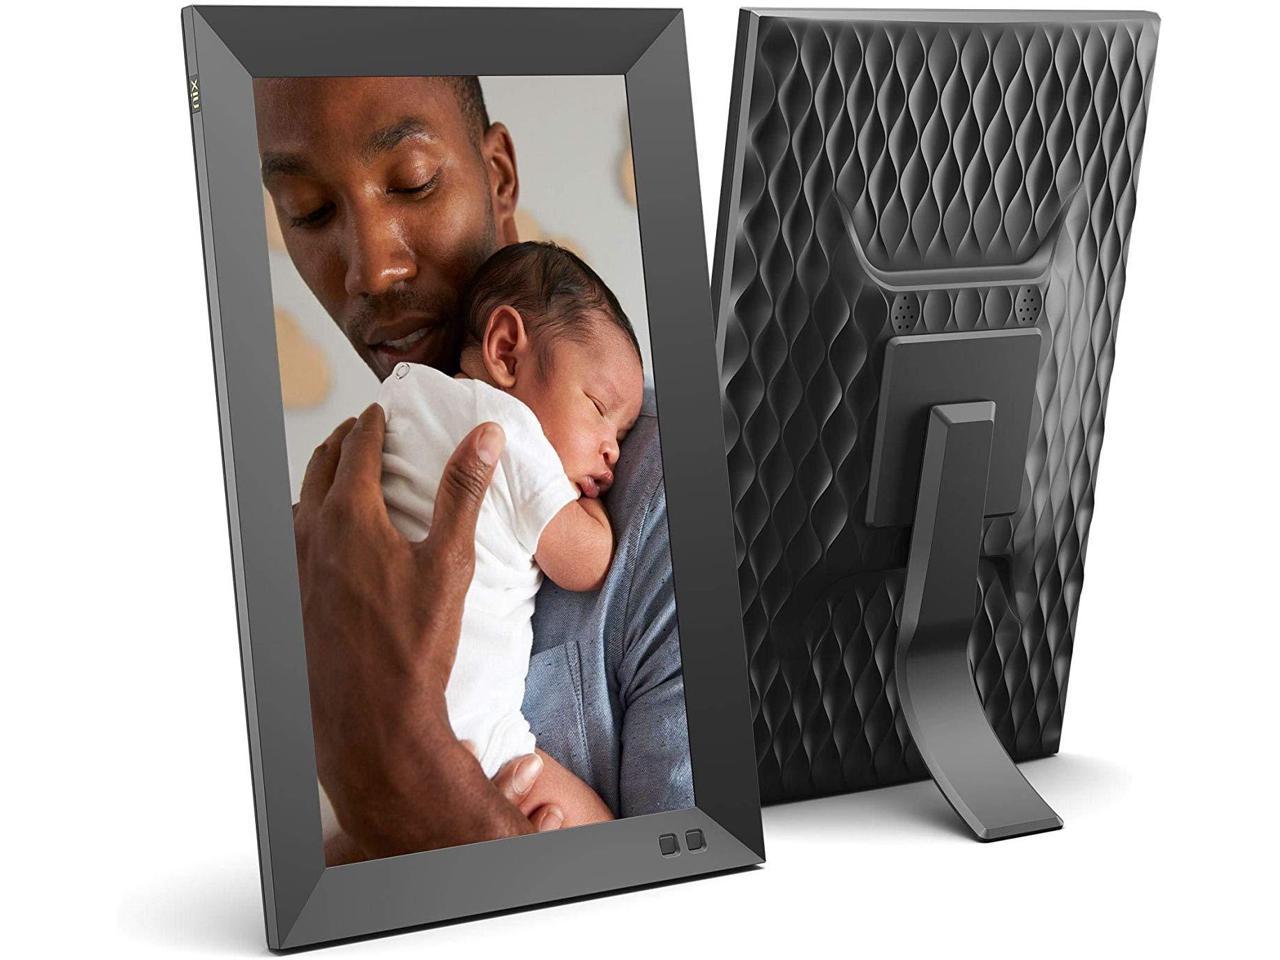 NIX 13 Inch Full HD Digital Photo Frame - Portrait or Landscape Stand, Auto-Rotate, Magnetic Remote Control, USB/SD Card Supported